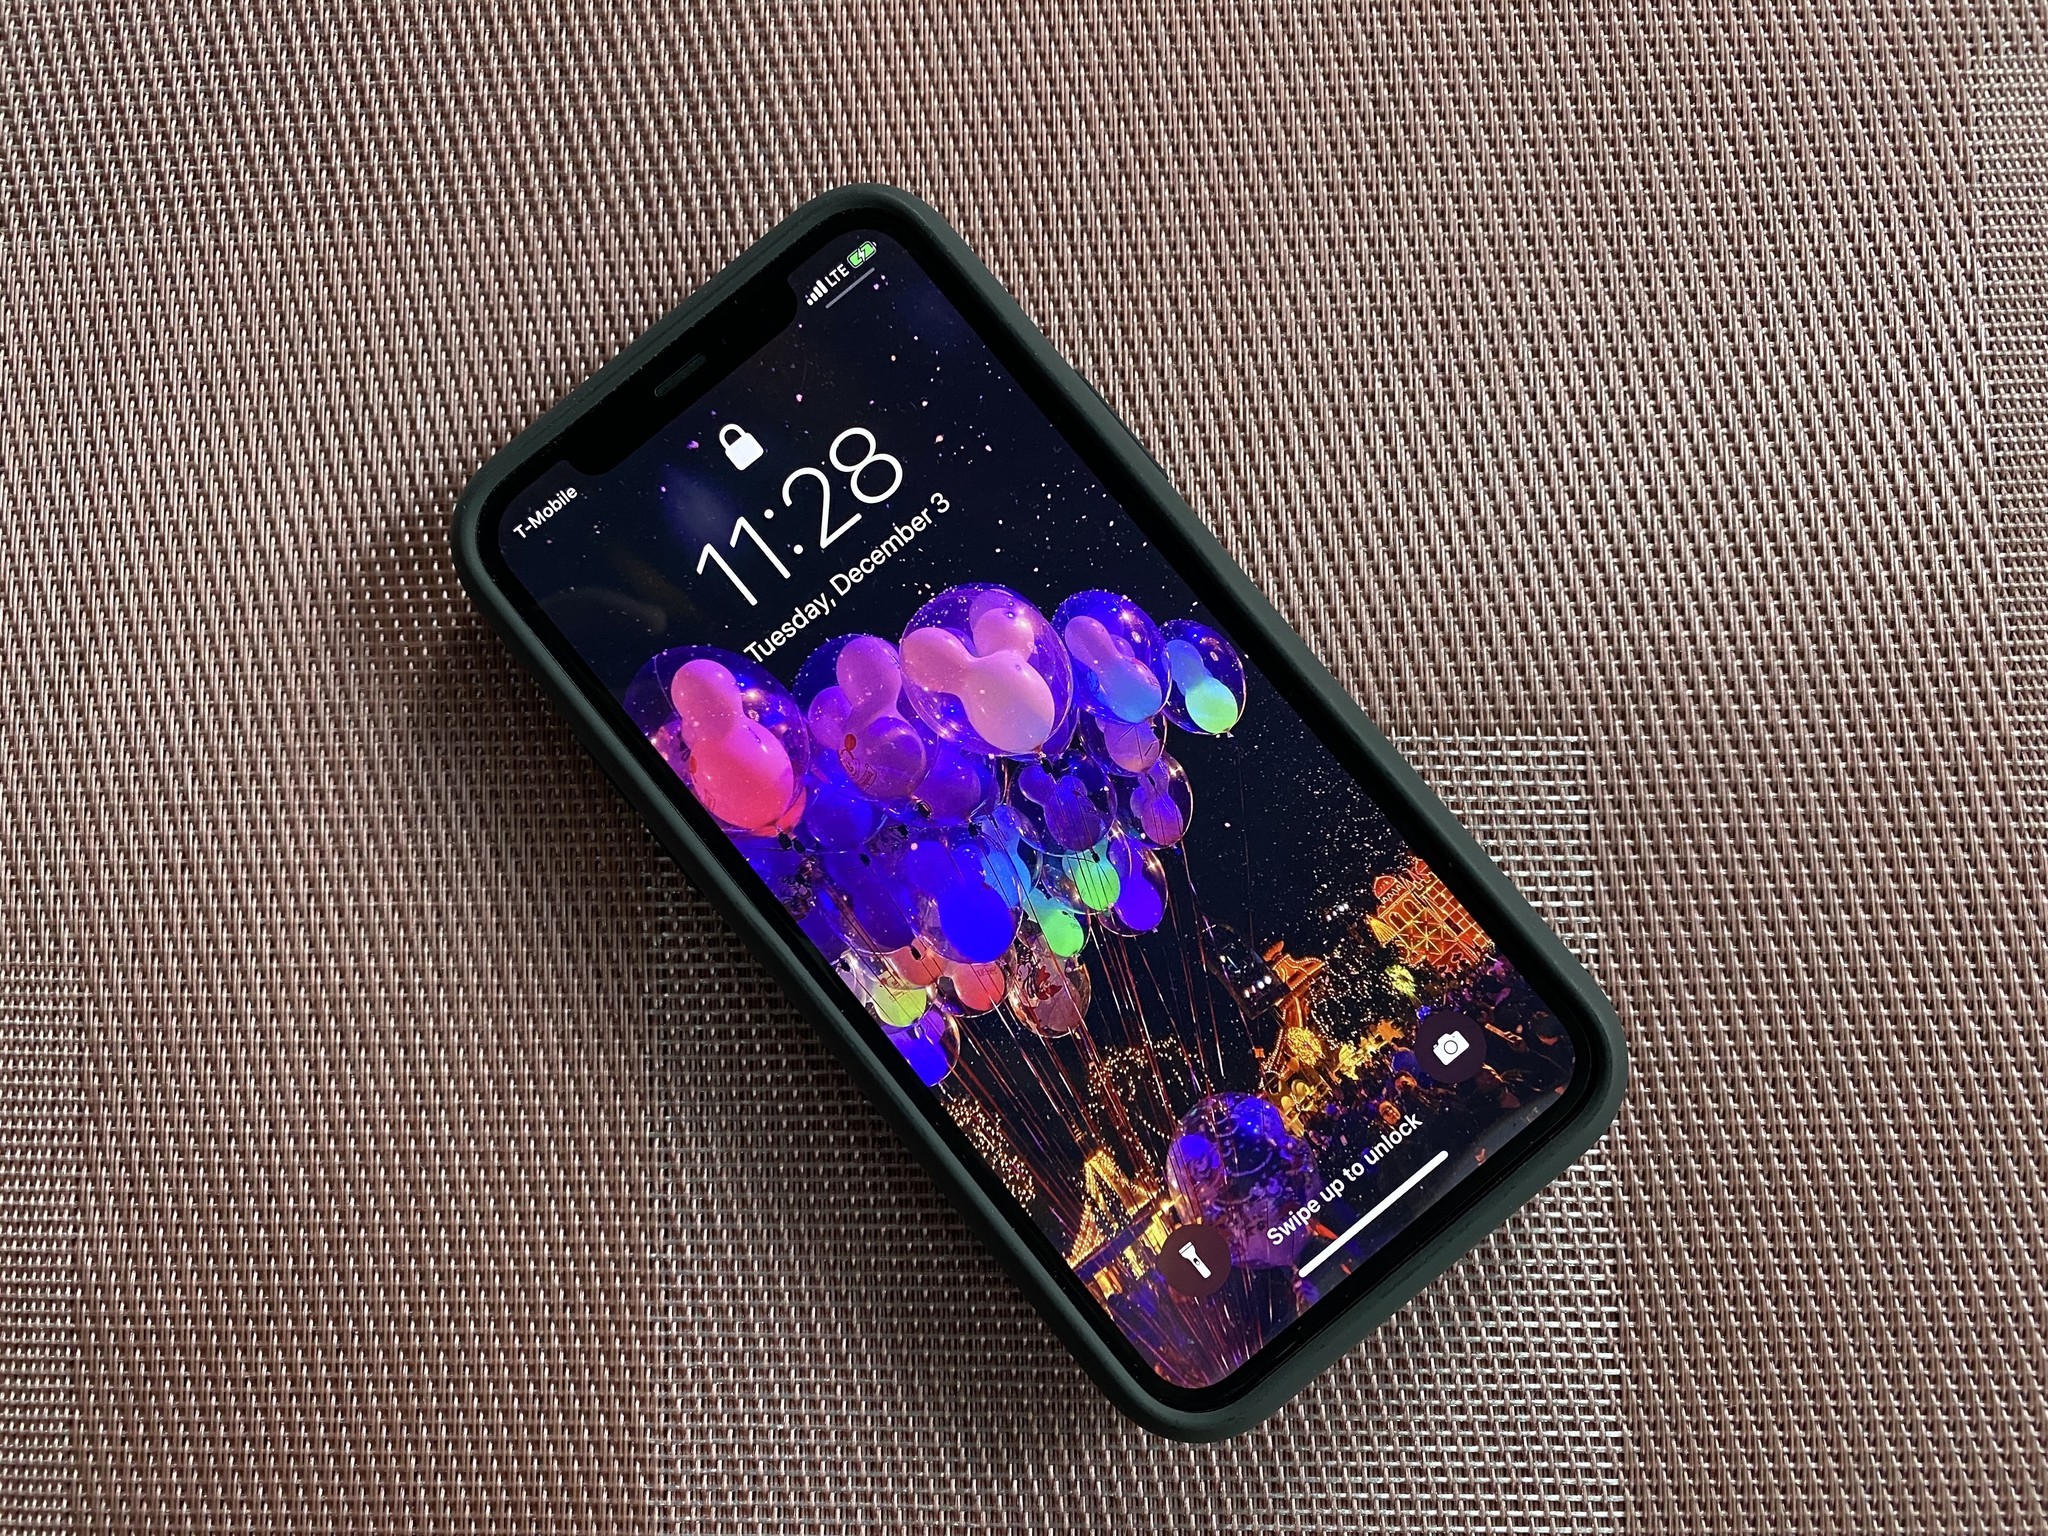 The front of the Smart Battery Case on iPhone 11 Pro